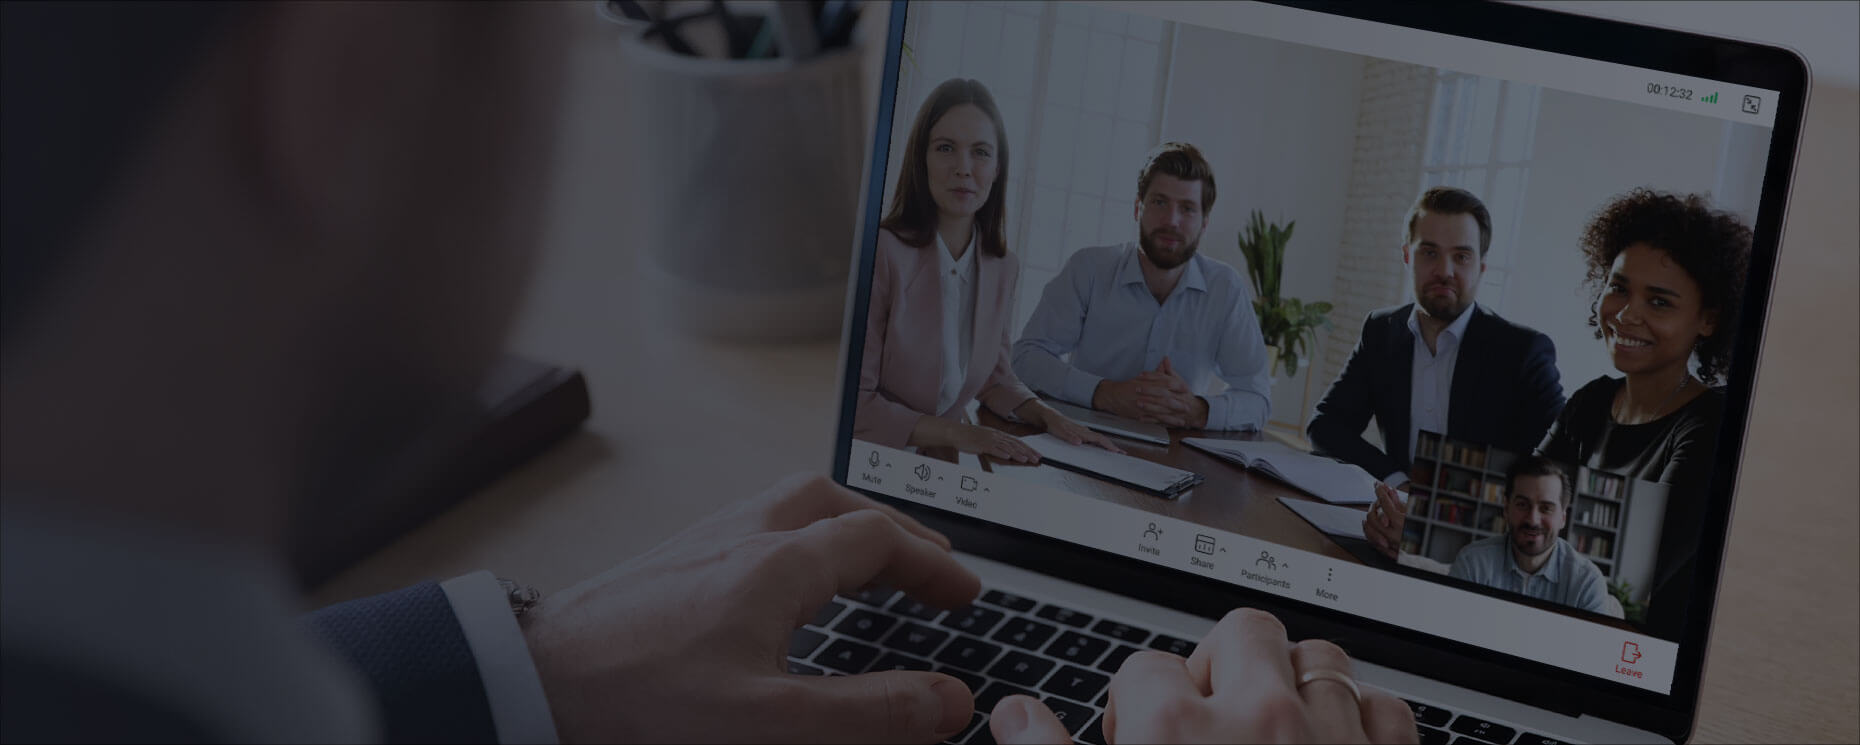 Use Matrx for online meeting and screen sharing with your team